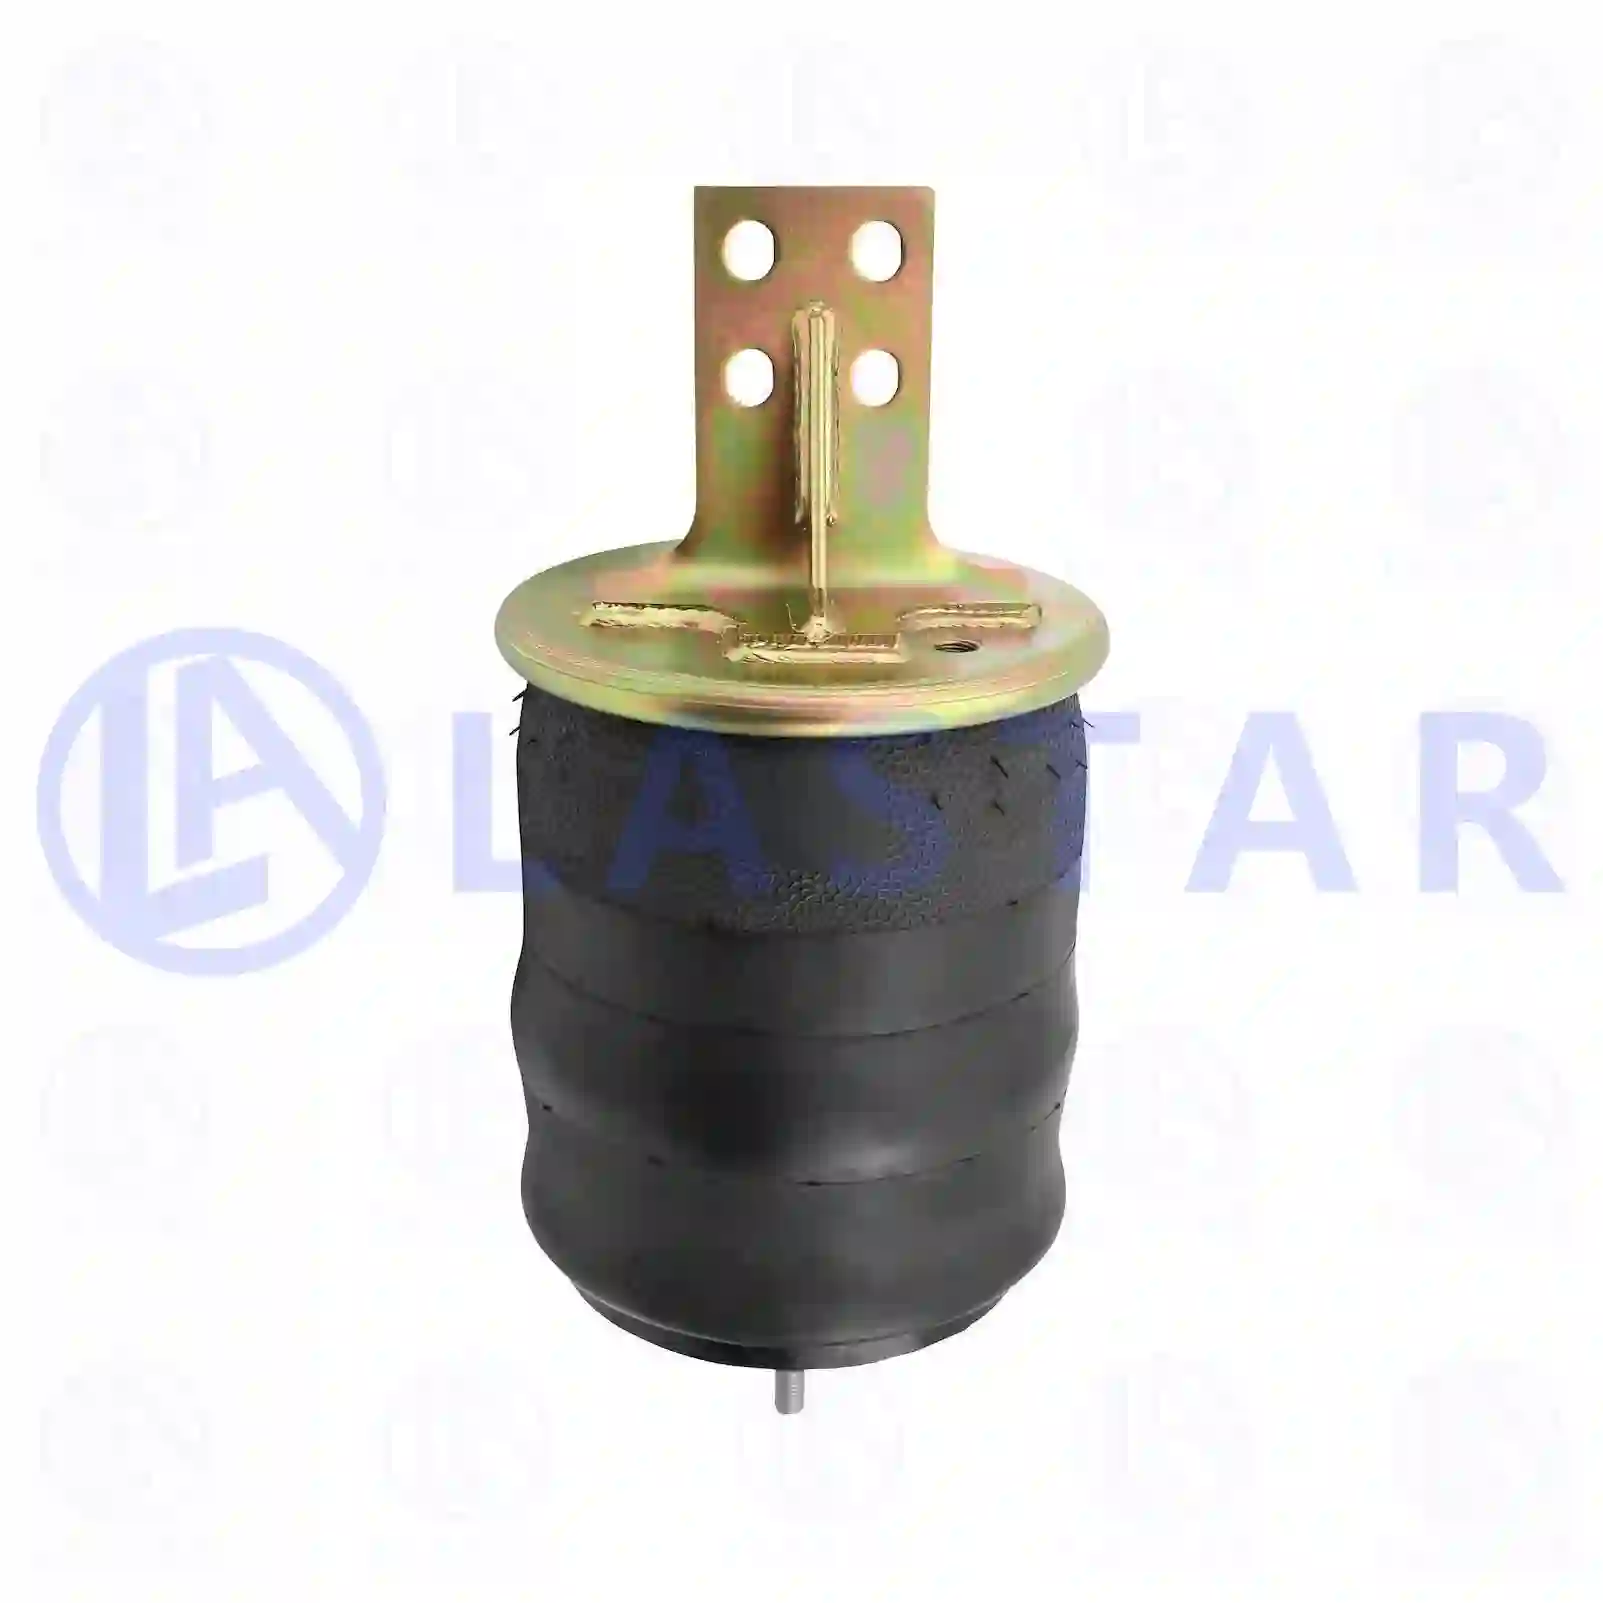 Air spring, with plastic piston, 77729287, 41270465, ZG40727-0008, ||  77729287 Lastar Spare Part | Truck Spare Parts, Auotomotive Spare Parts Air spring, with plastic piston, 77729287, 41270465, ZG40727-0008, ||  77729287 Lastar Spare Part | Truck Spare Parts, Auotomotive Spare Parts